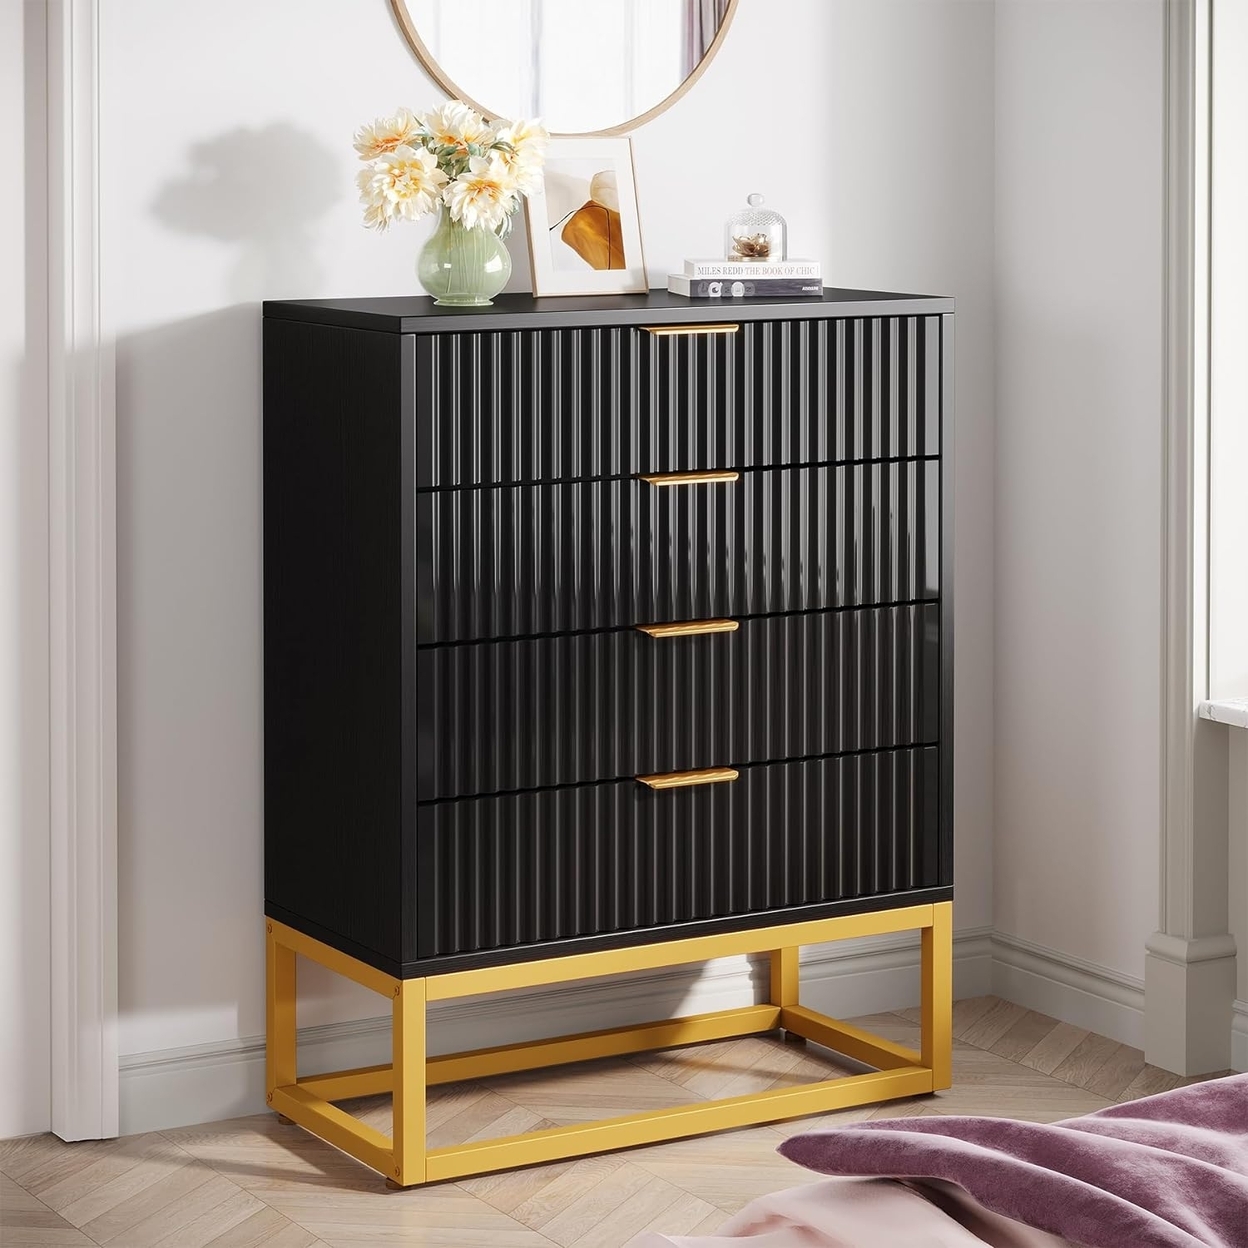 Tribesigns 4 Drawers Dresser, Modern Dressers With Fluted Panel And Metal Frame, Wood Storage Chest Of Drawers - Black & Gold, 1pc